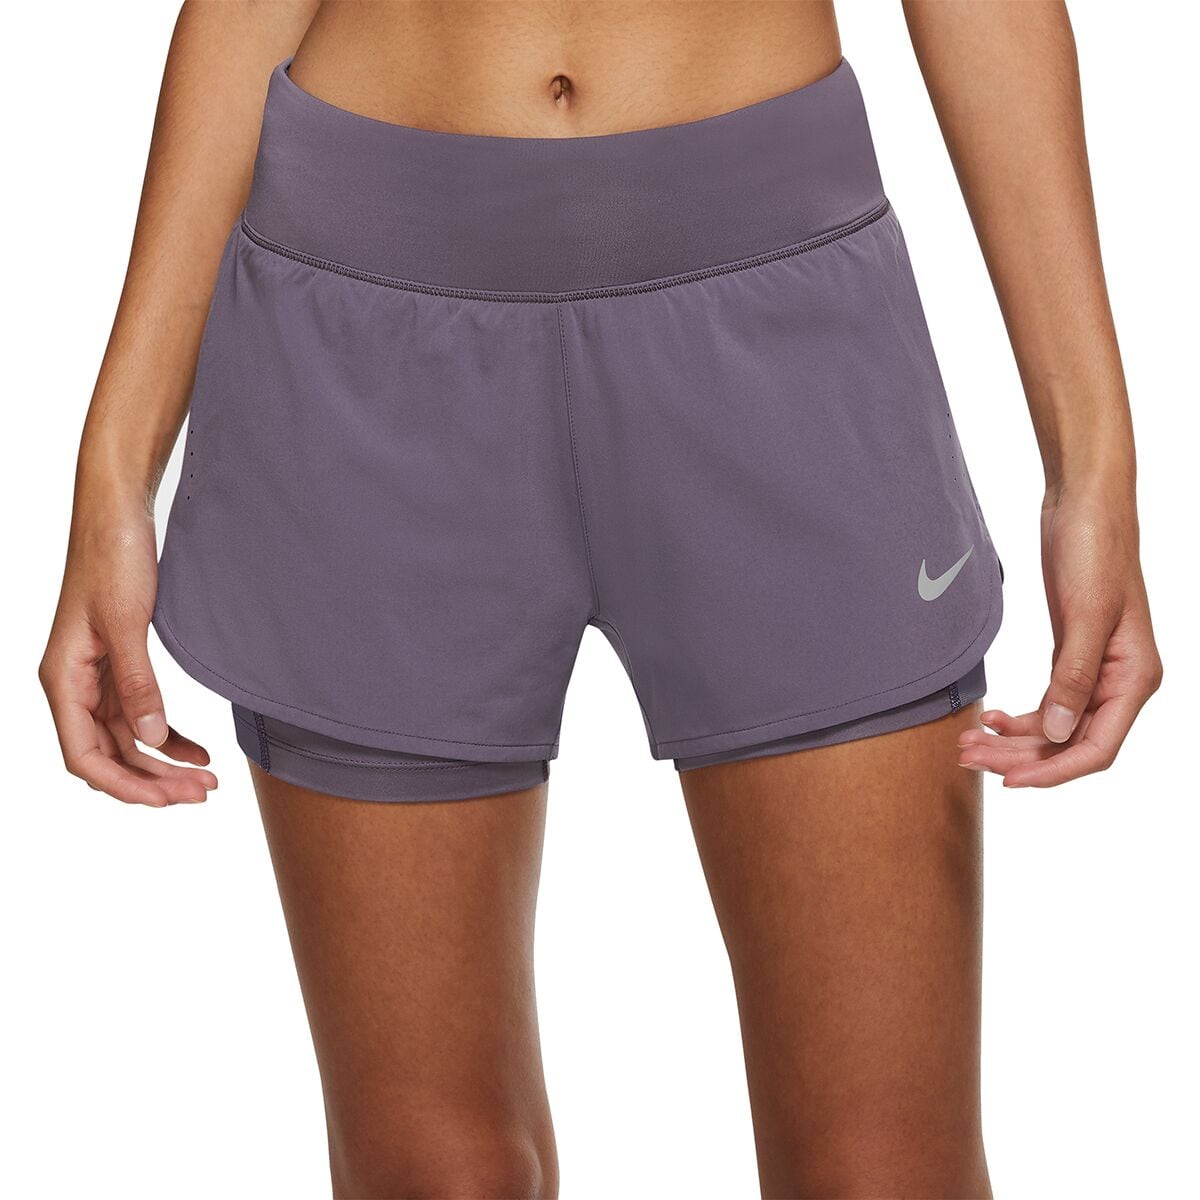 Nike Eclipse 2-in-1 - Women's Clothing